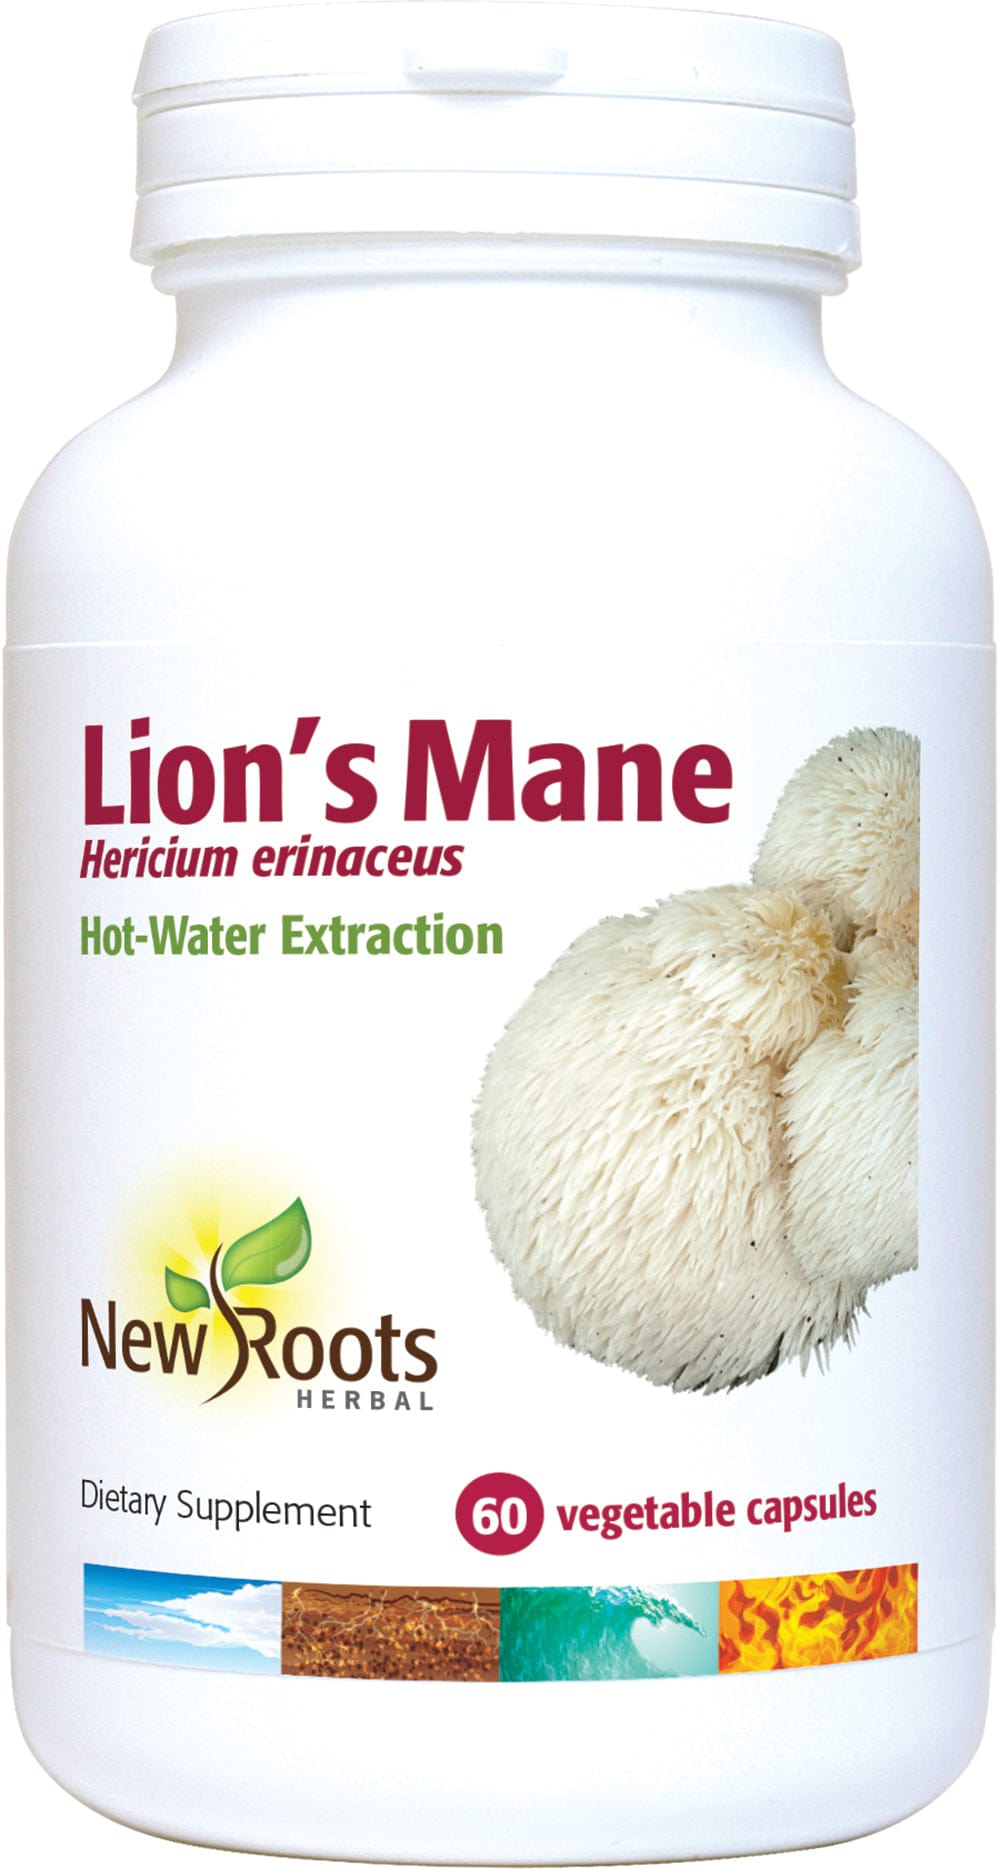 NEW ROOTS HERBAL Suppléments Lion's Mane (Hericium) 60vcaps